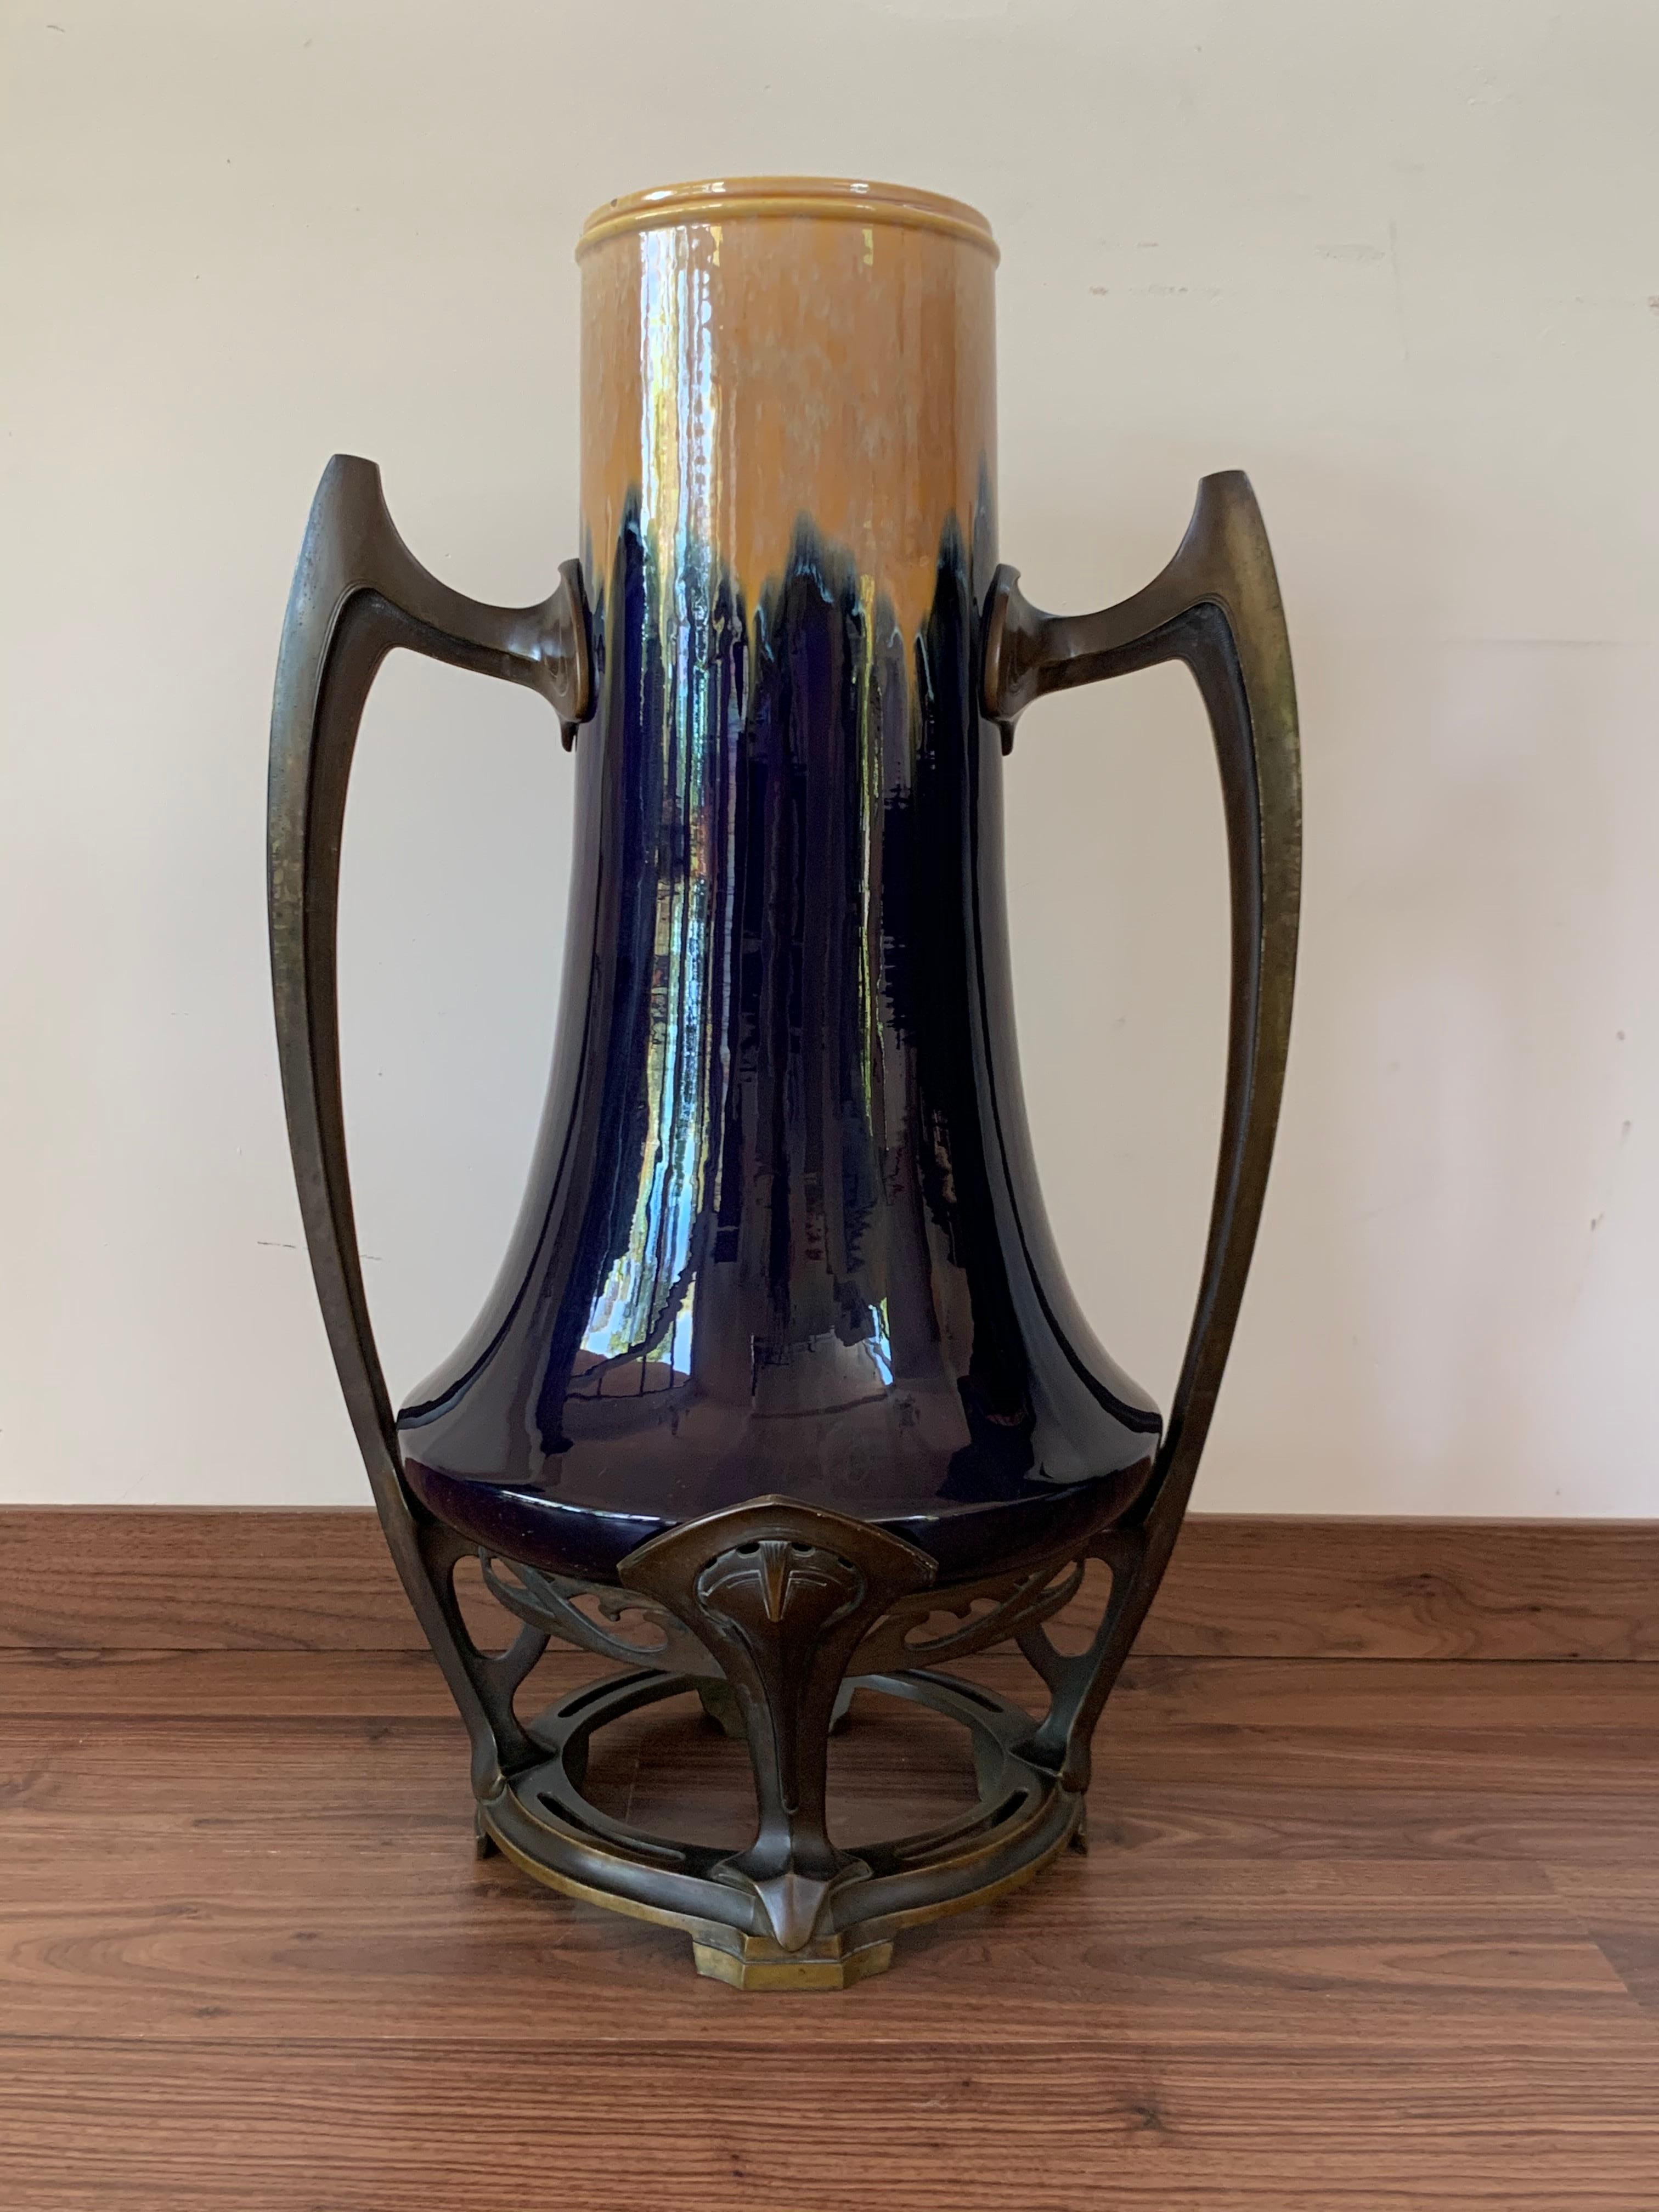 Jugendstil ceramic vase bronze mounted is an original decorative object realized in the early 20th century.
Original ceramic vase with cream and cobalt blue glaze. All around colorful.

 